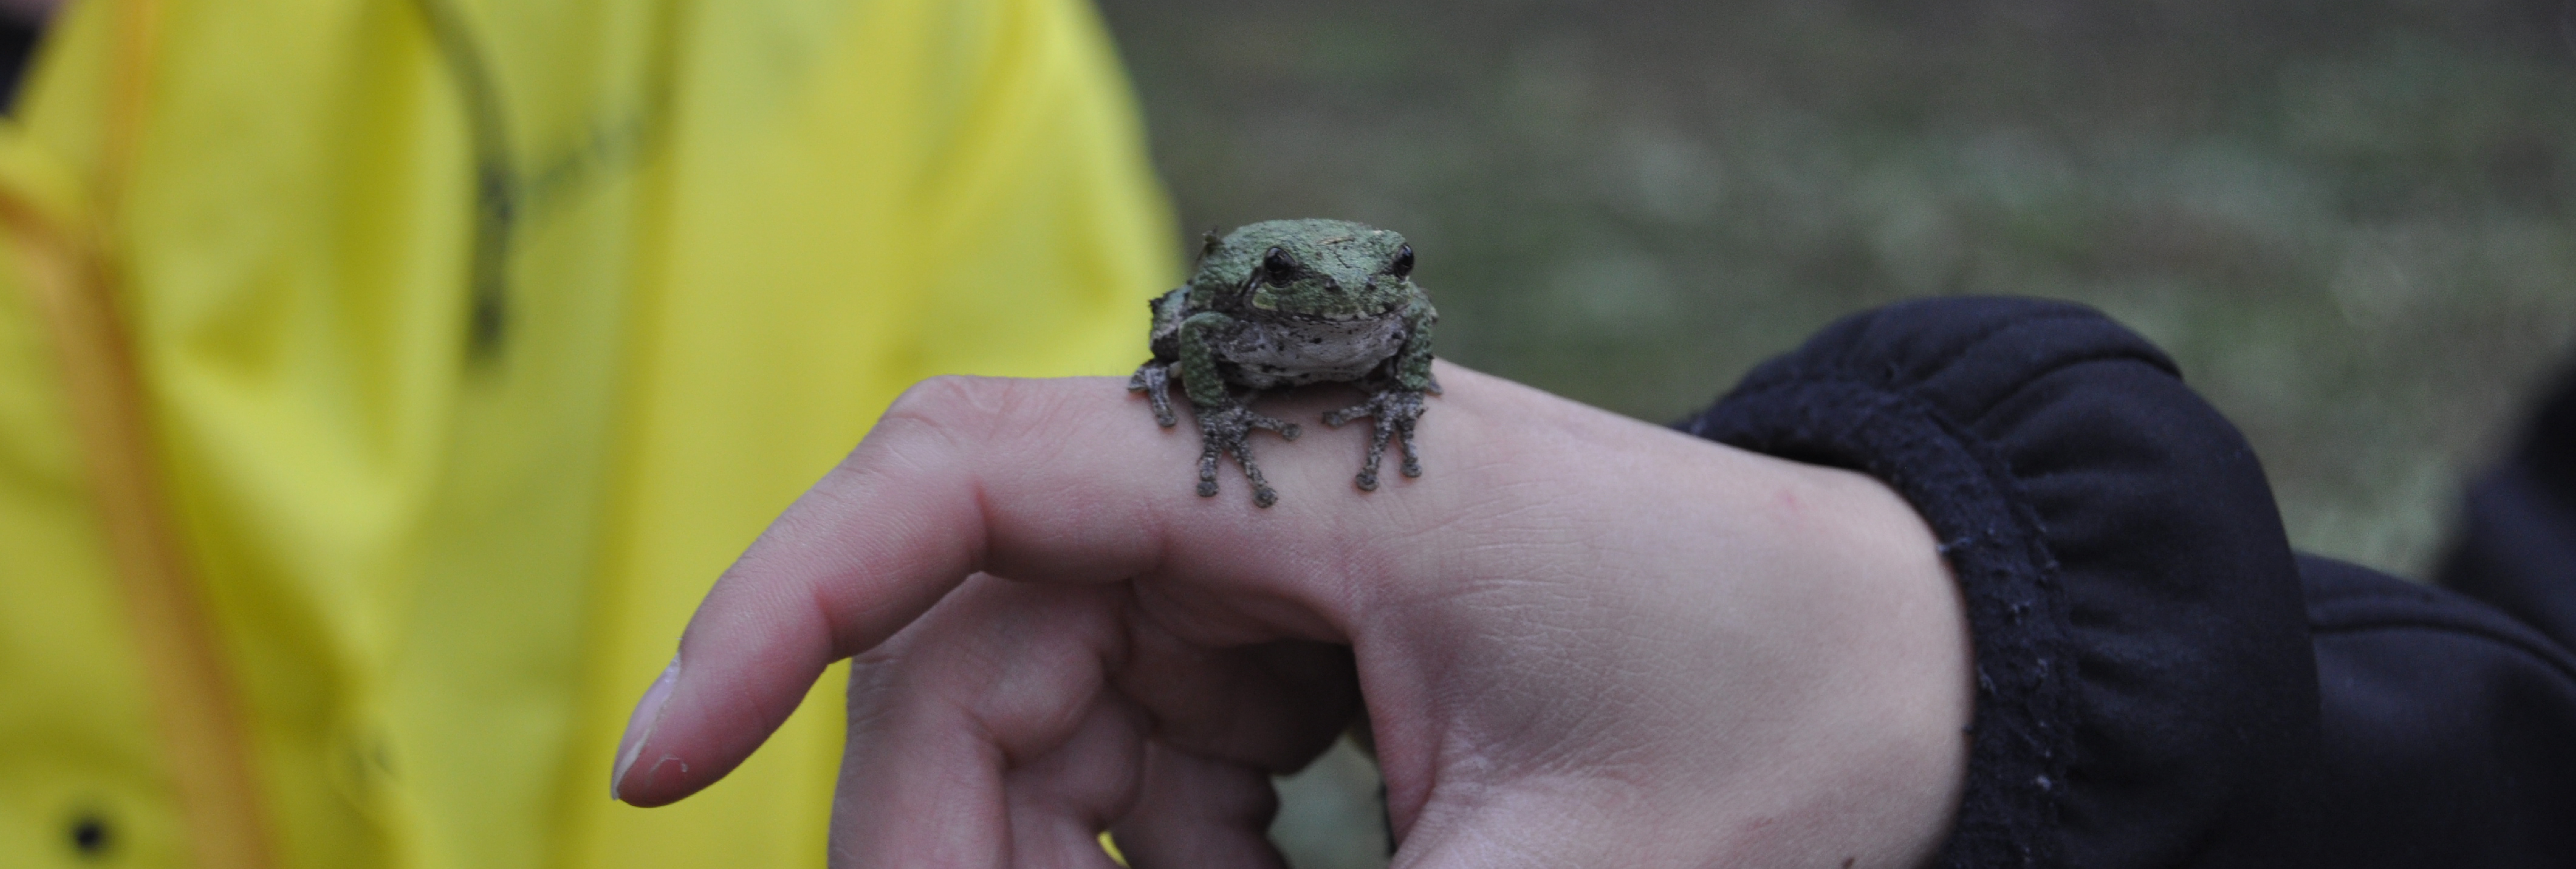 Small frog on a finger